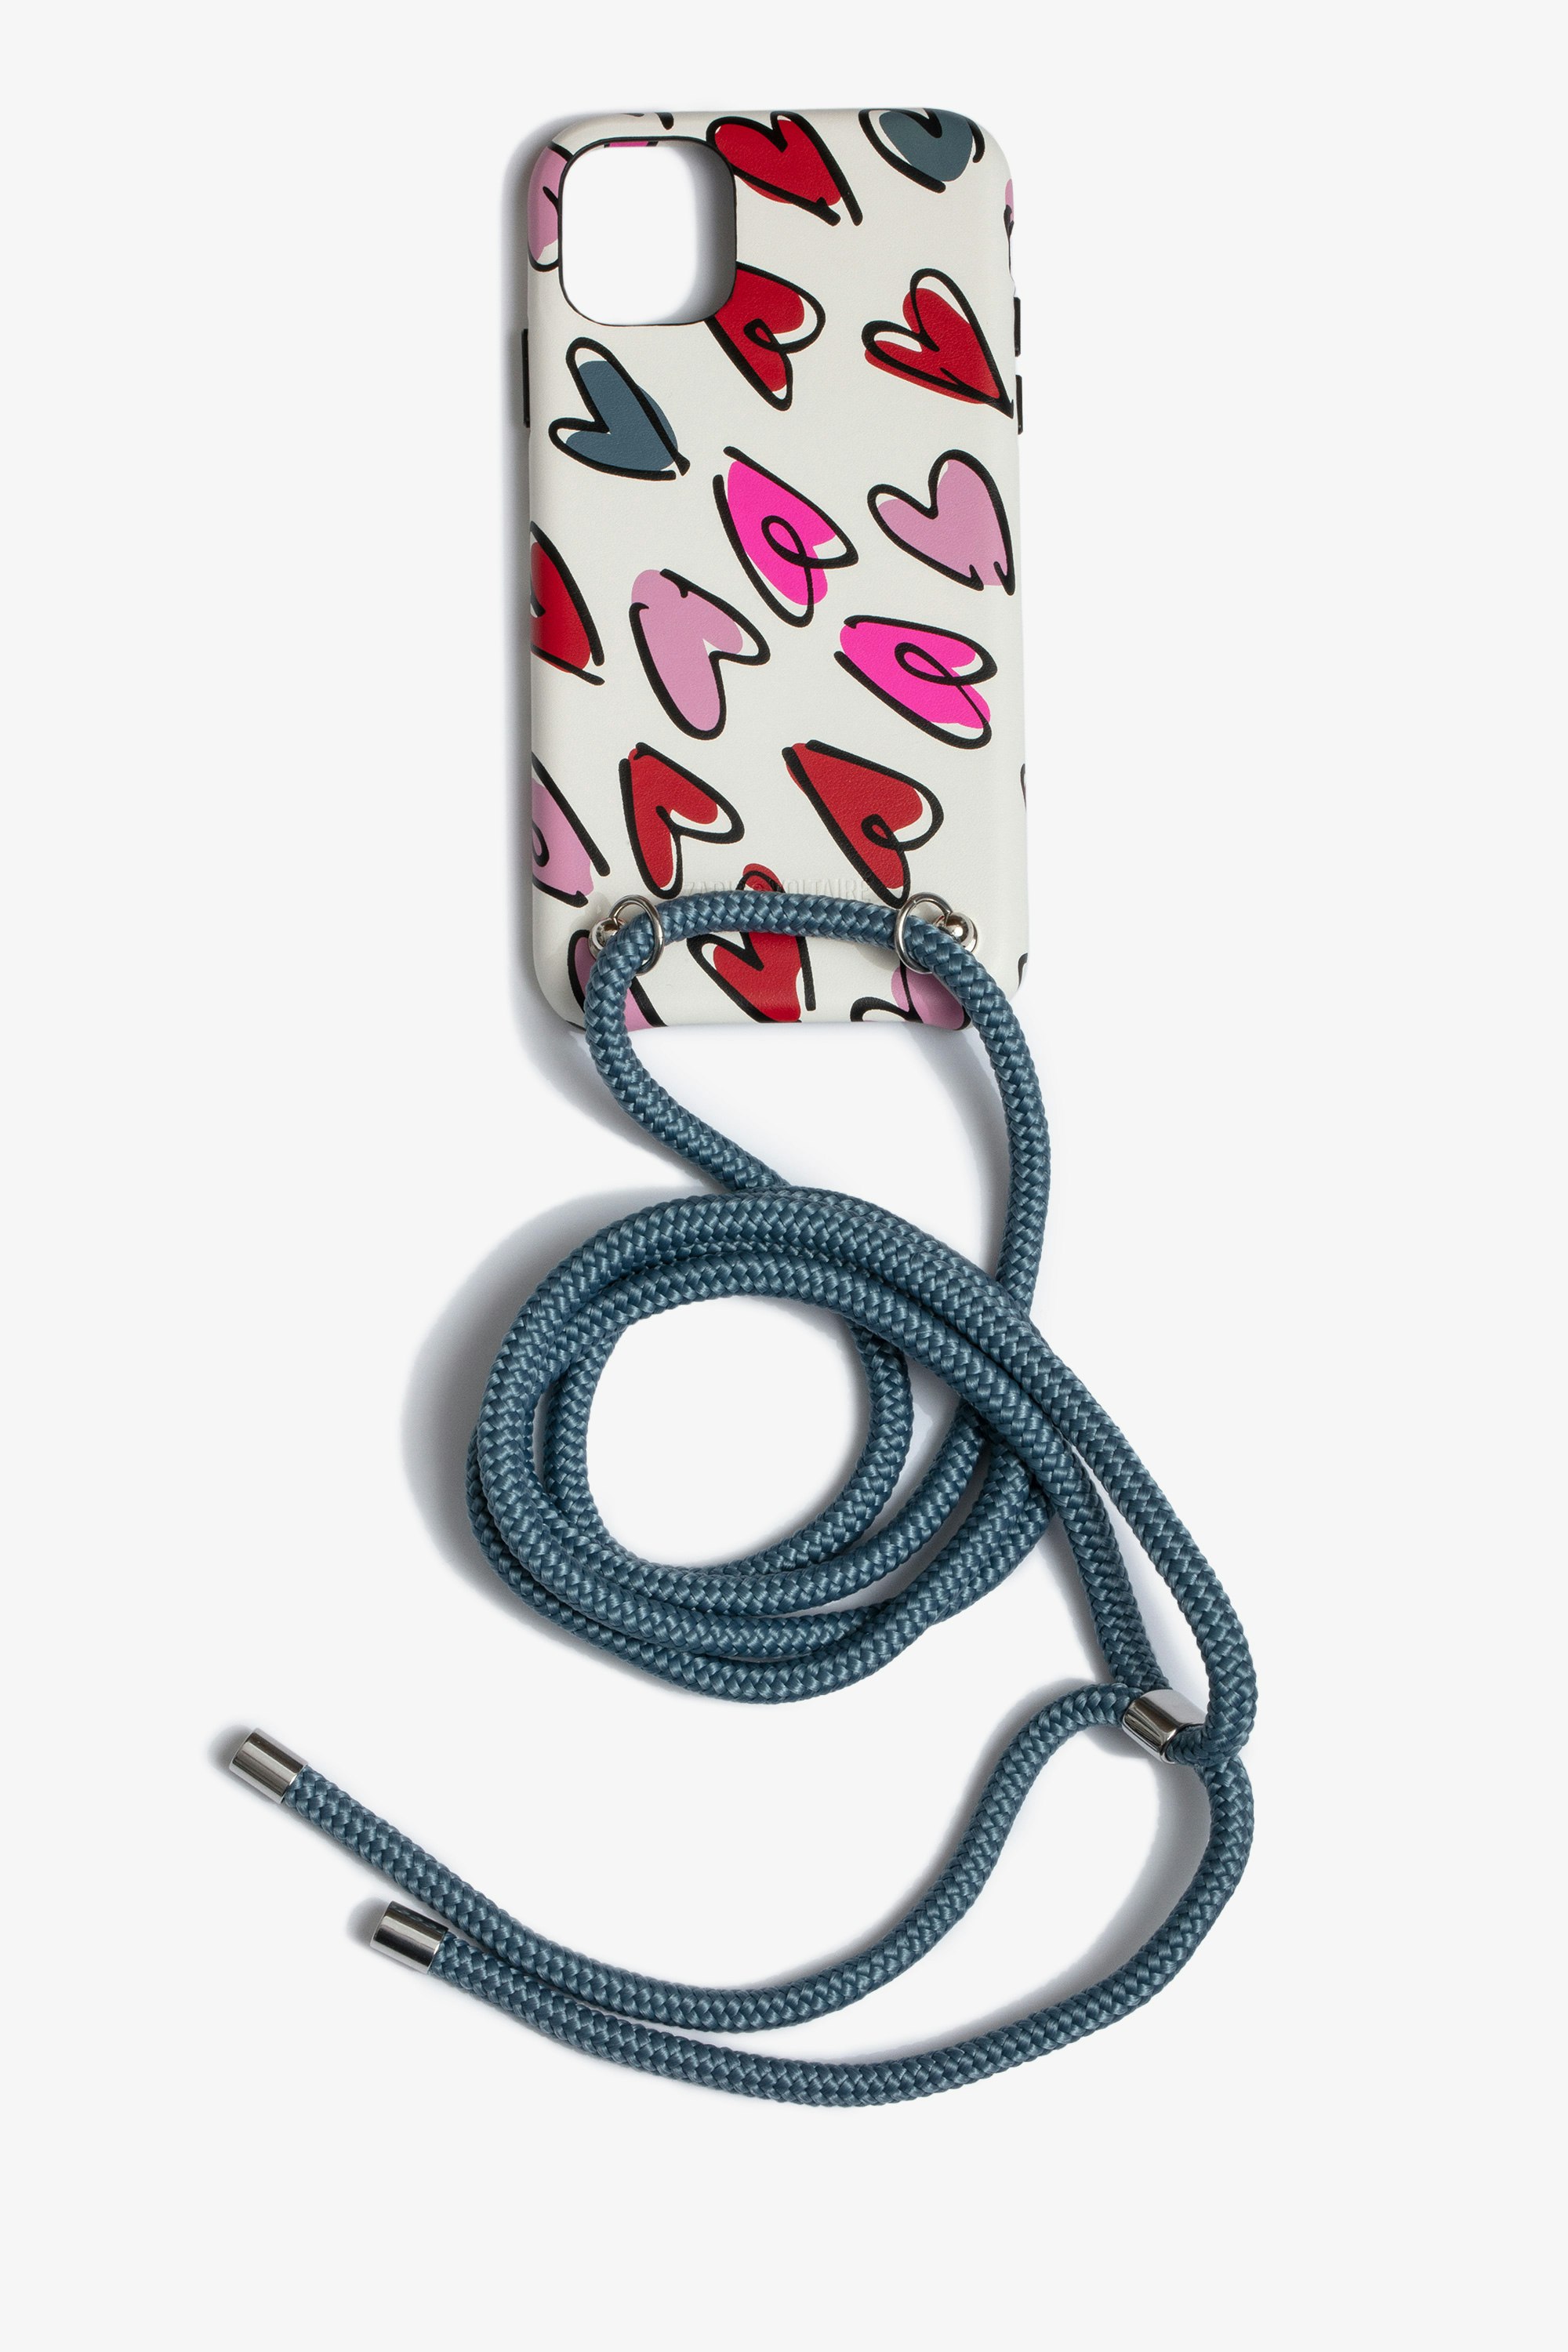 ZV Small Heart Rope iPhone 11 ケース Women’s iPhone 11 cover with a cord to wear around your neck